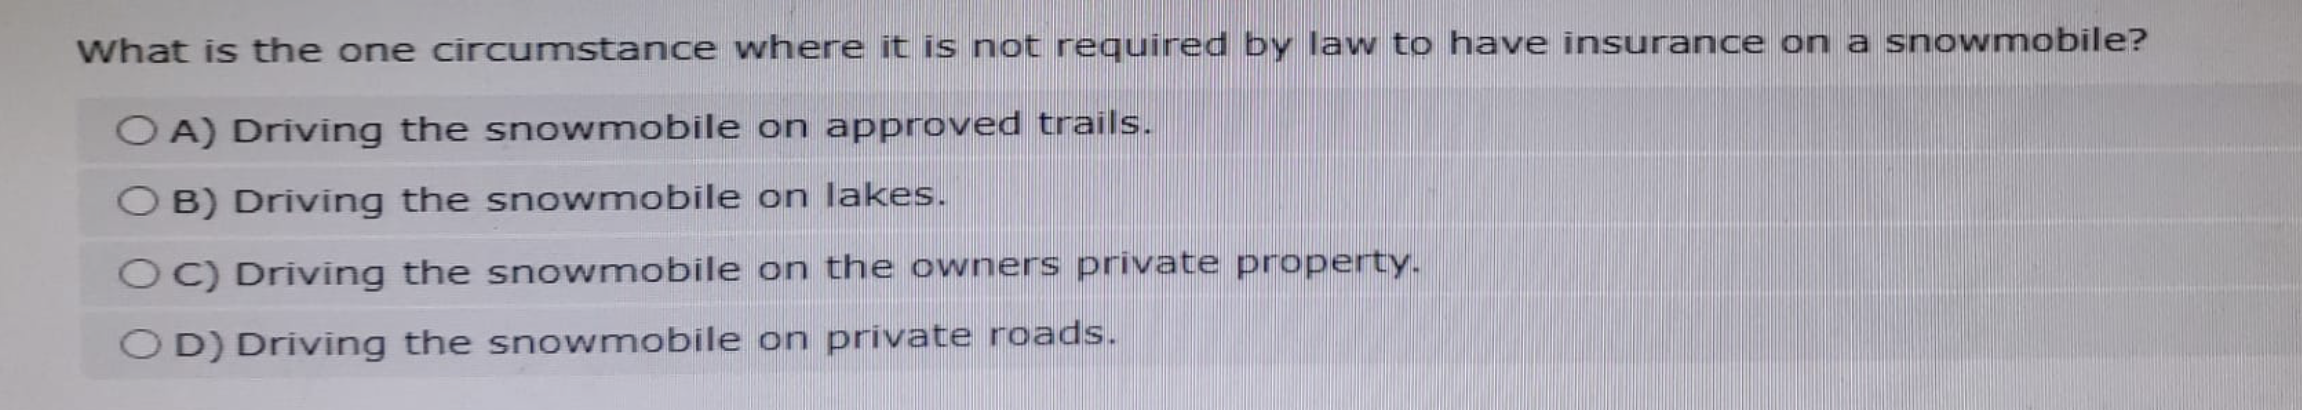 What is the one circumstance where it is not required by law to have insurance on a snowmobile?
OA) Driving the snowmobile on approved trails.
B) Driving the snowmobile on lakes.
OC) Driving the snowmobile on the owners private property.
OD) Driving the snowmobile on private roads.